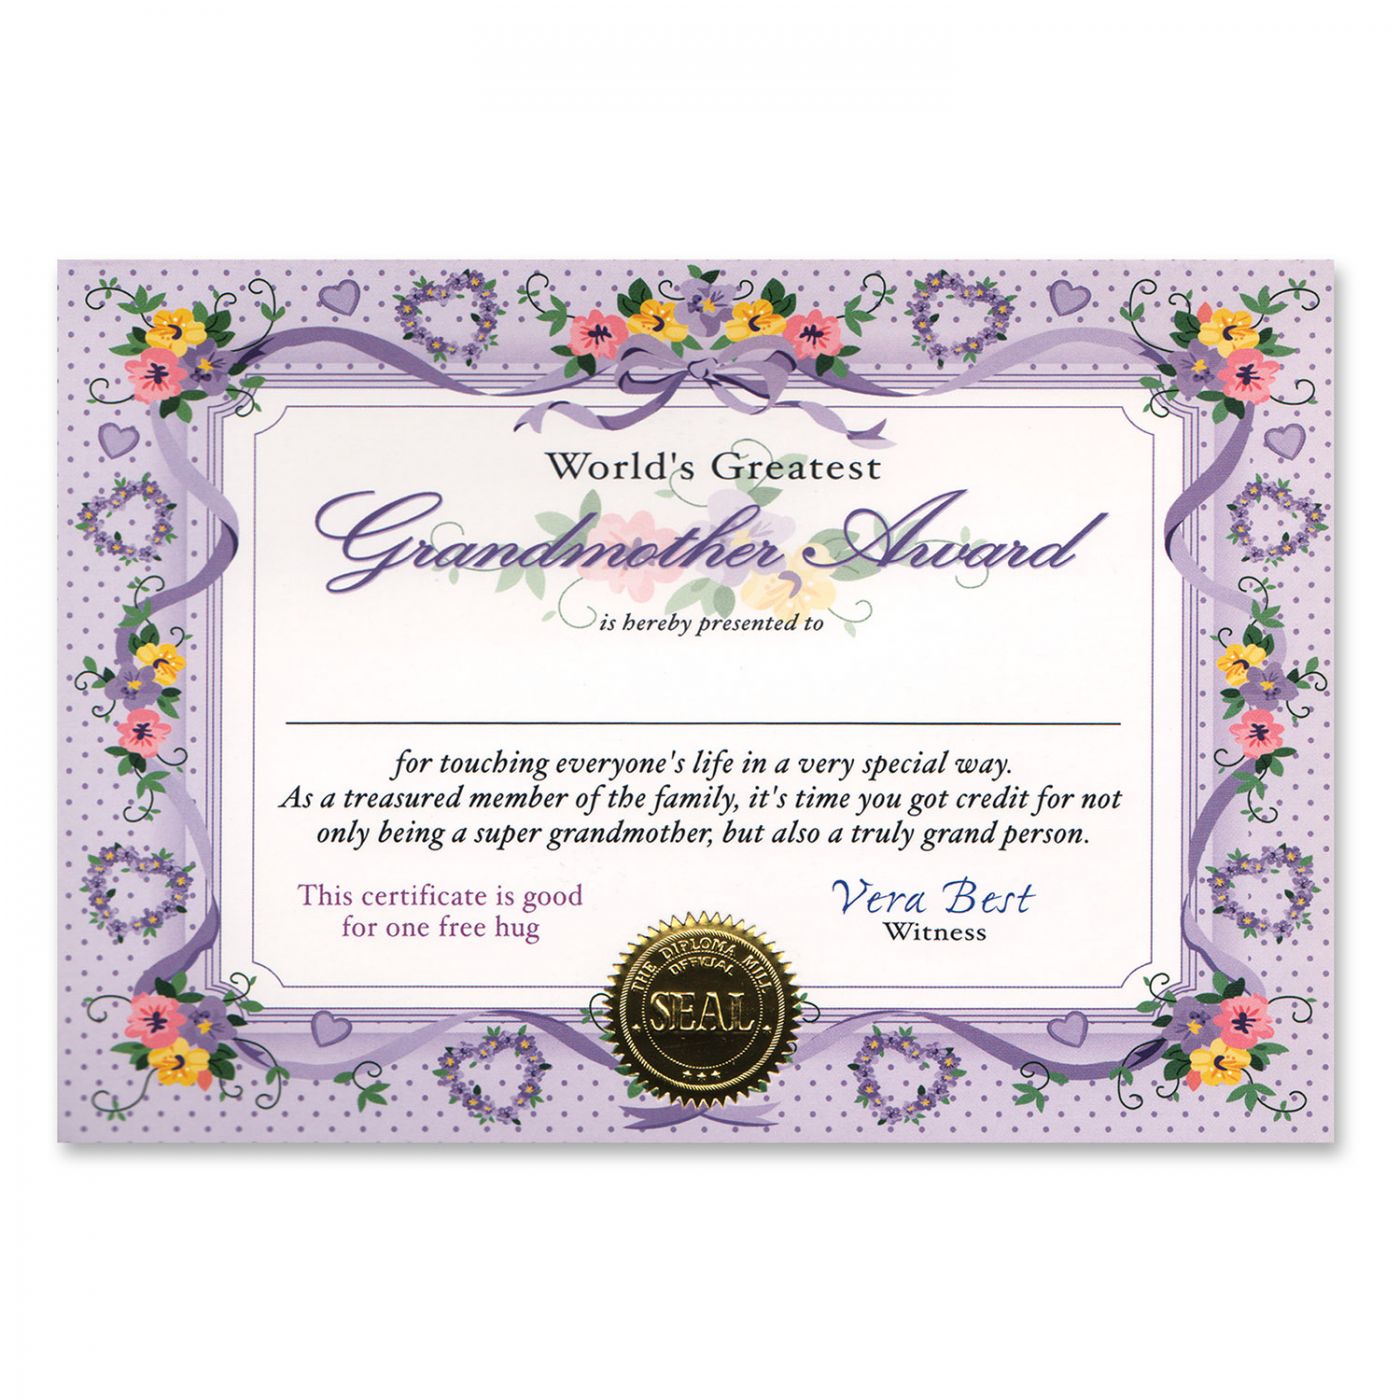 World's Greatest Grandmother Certificate (6) image